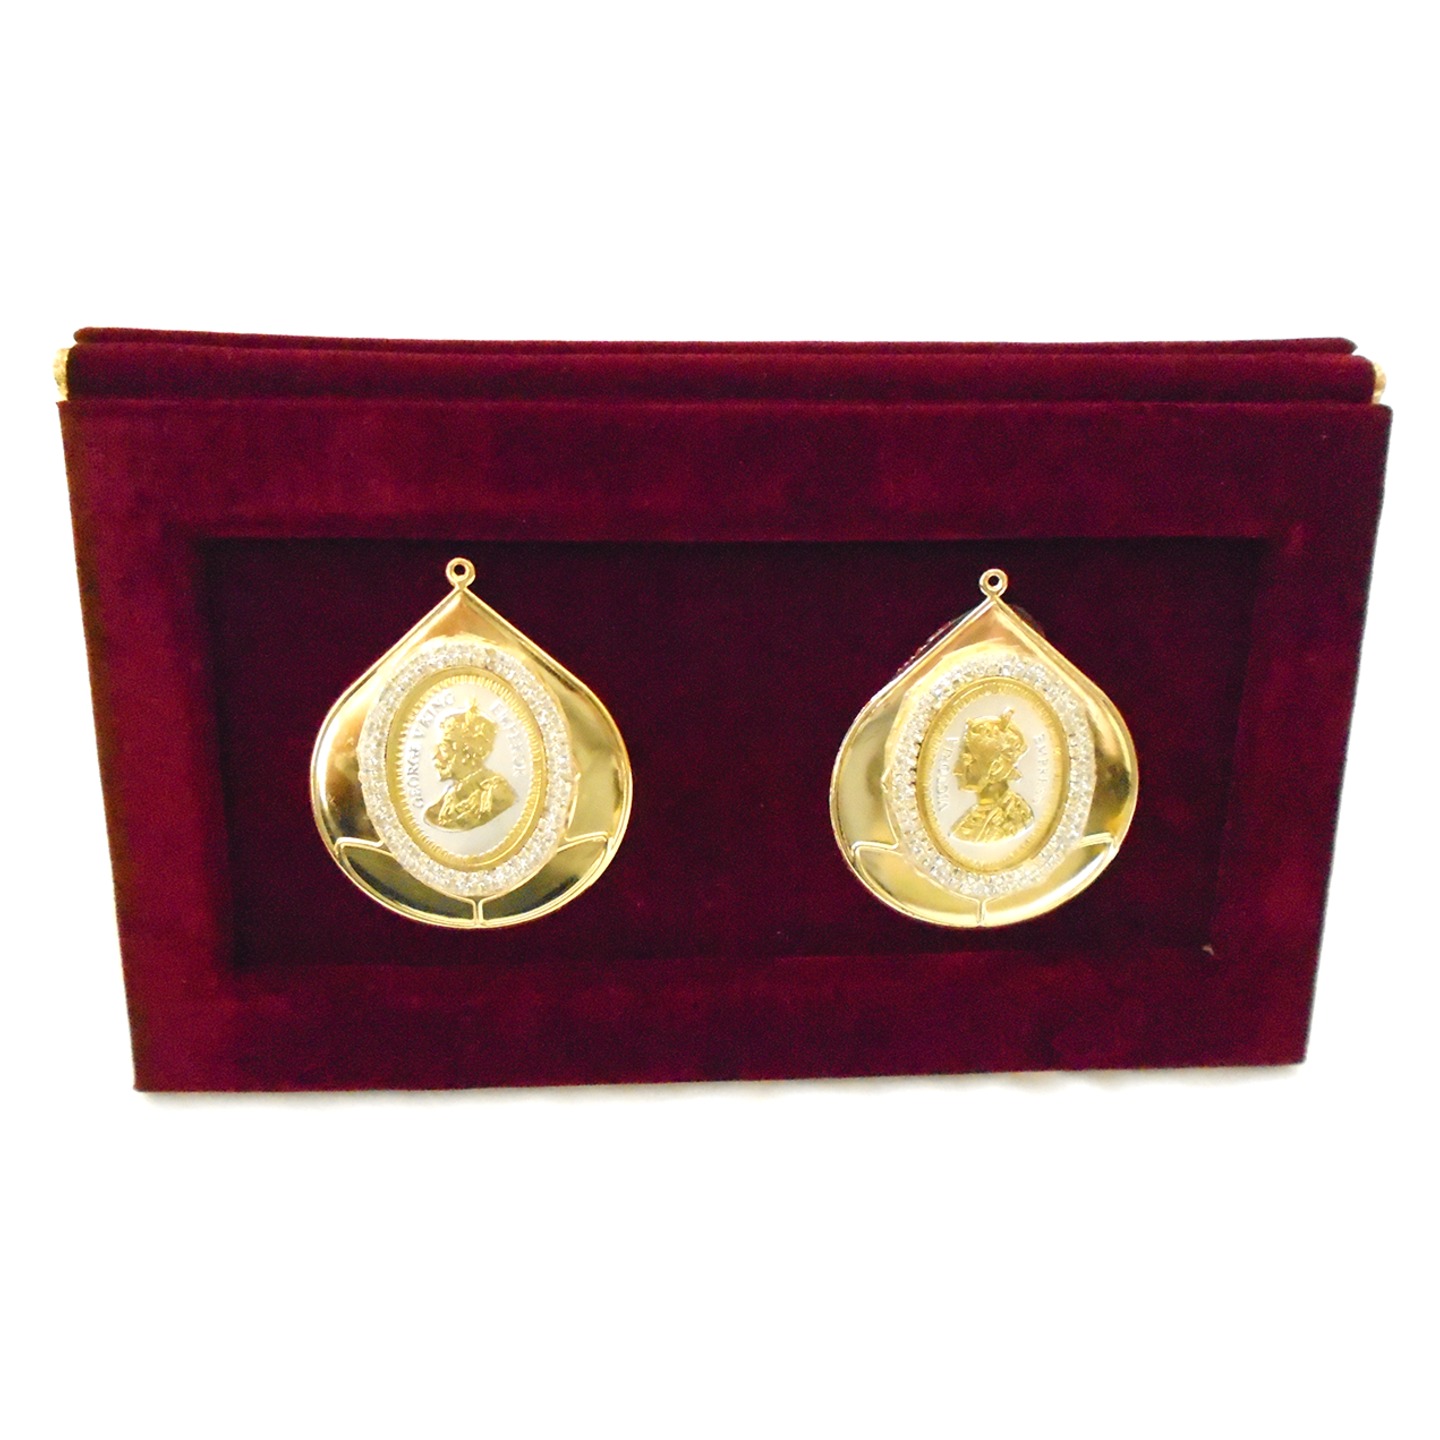 The Golden Droplet Zircon George King and Victoria Queen Silver Coin Set